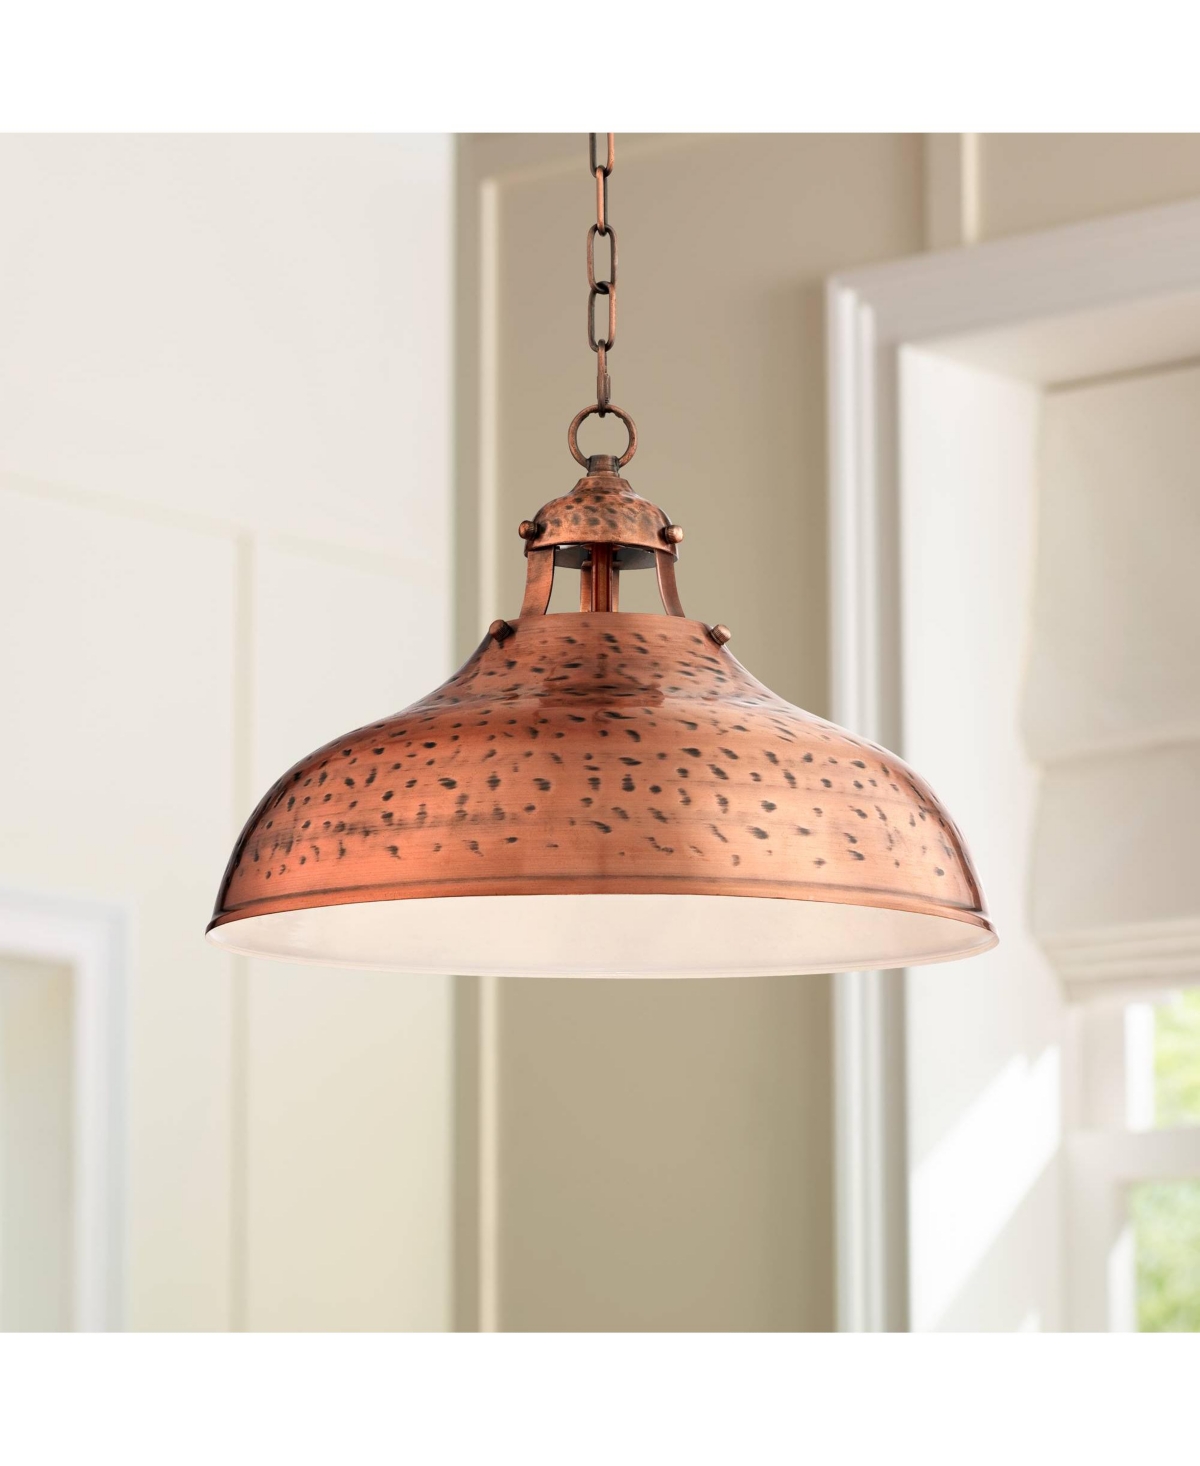 Franklin Iron Works Essex Dyed Copper Pendant Light Fixture 16" Wide Modern Farmhouse Industrial Rustic Hammered Dome Sh In Brown